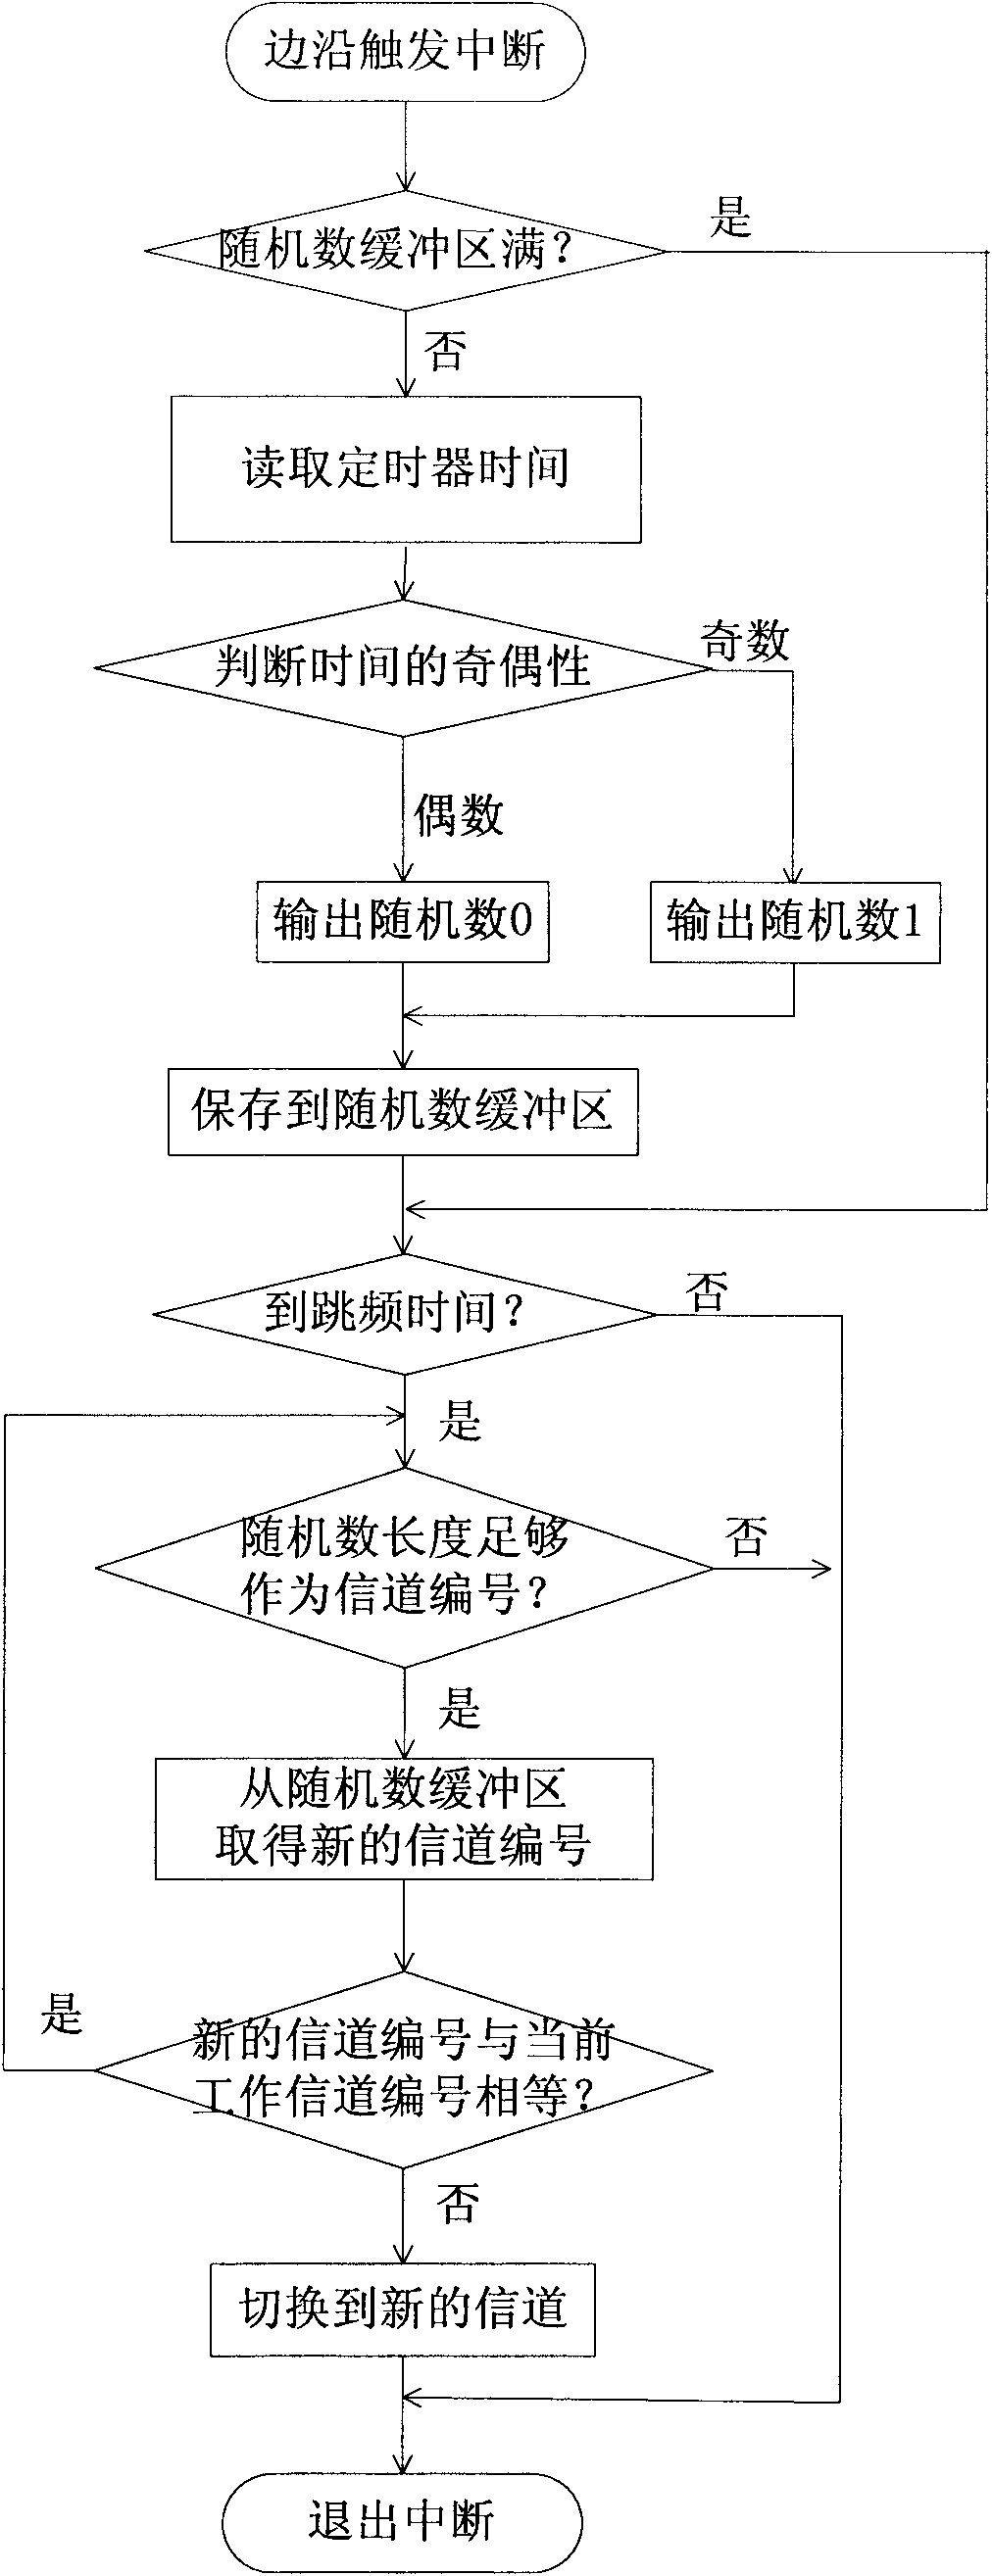 Ultrahigh frequency passive radio frequency identification reader and frequency hopping method thereof